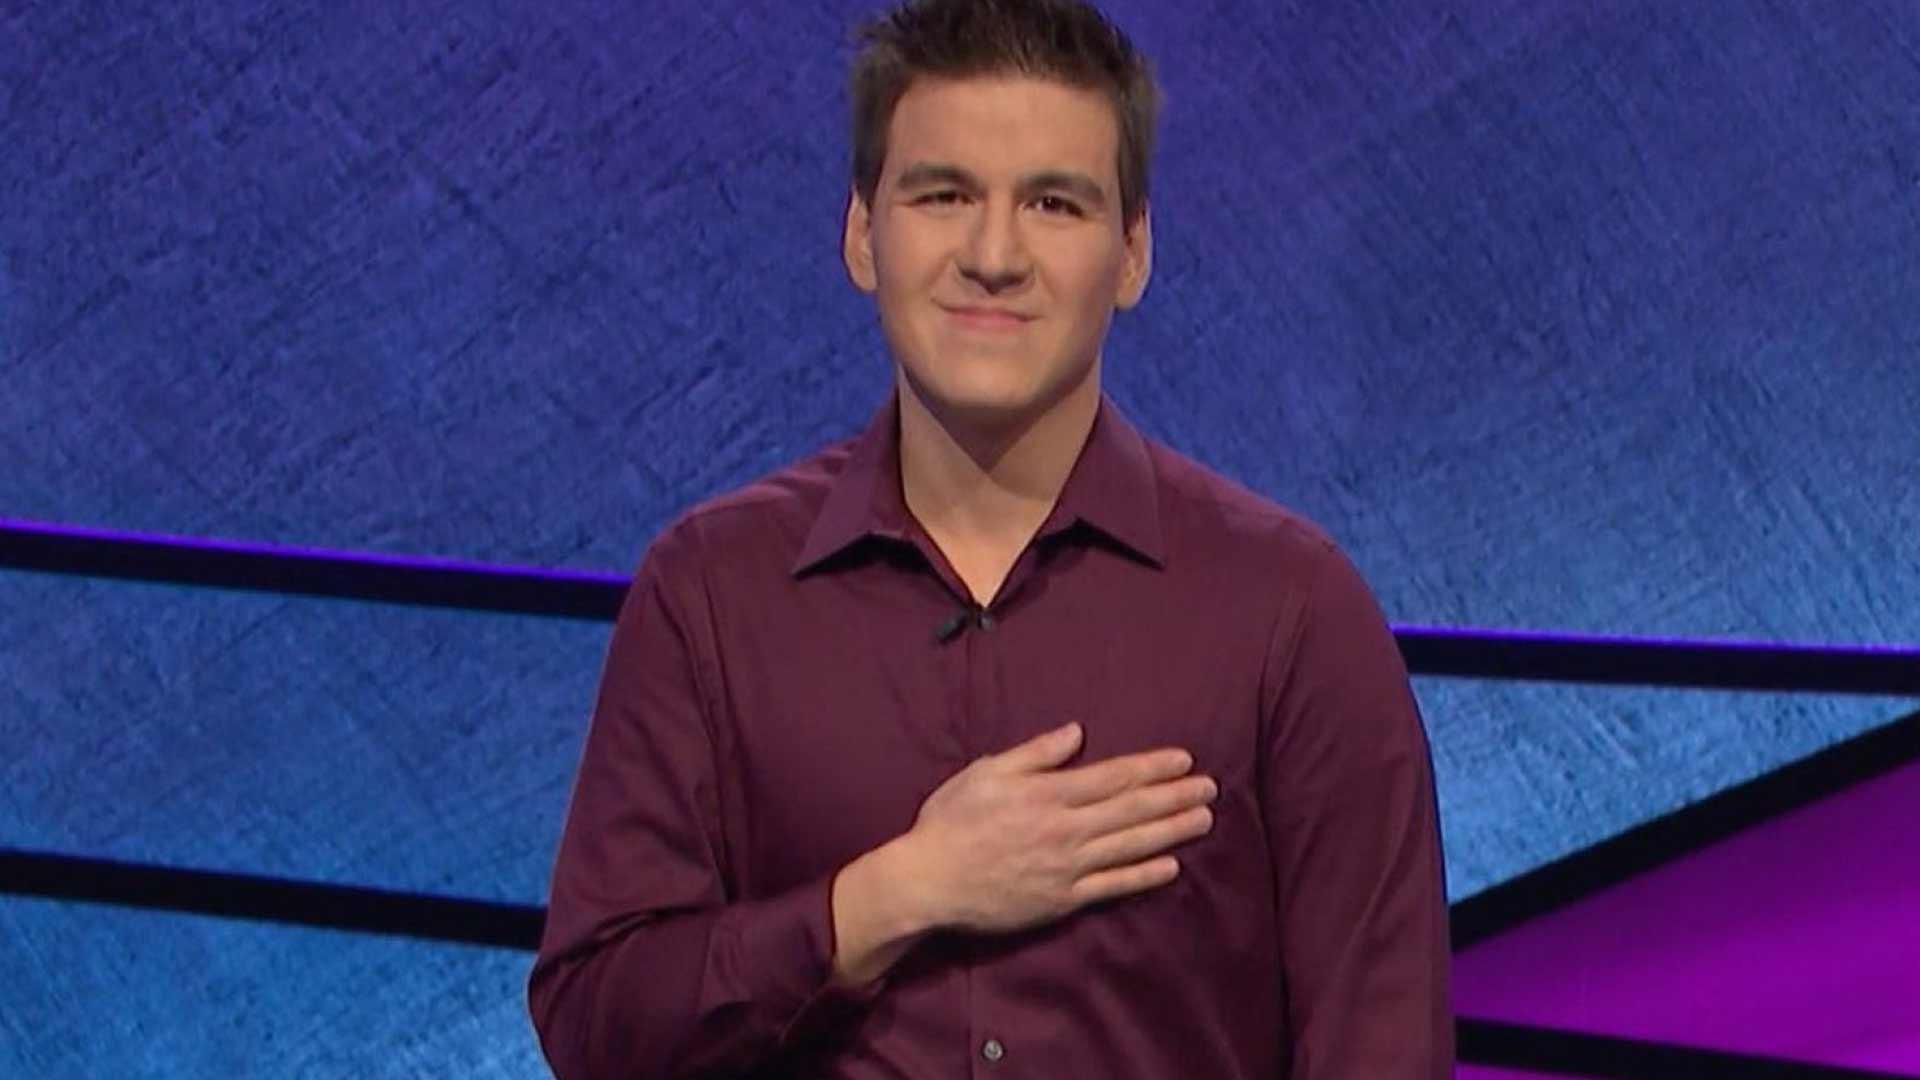 ‘Jeopardy!’ Super Champ James Holzhauer Finally Loses (We Think)